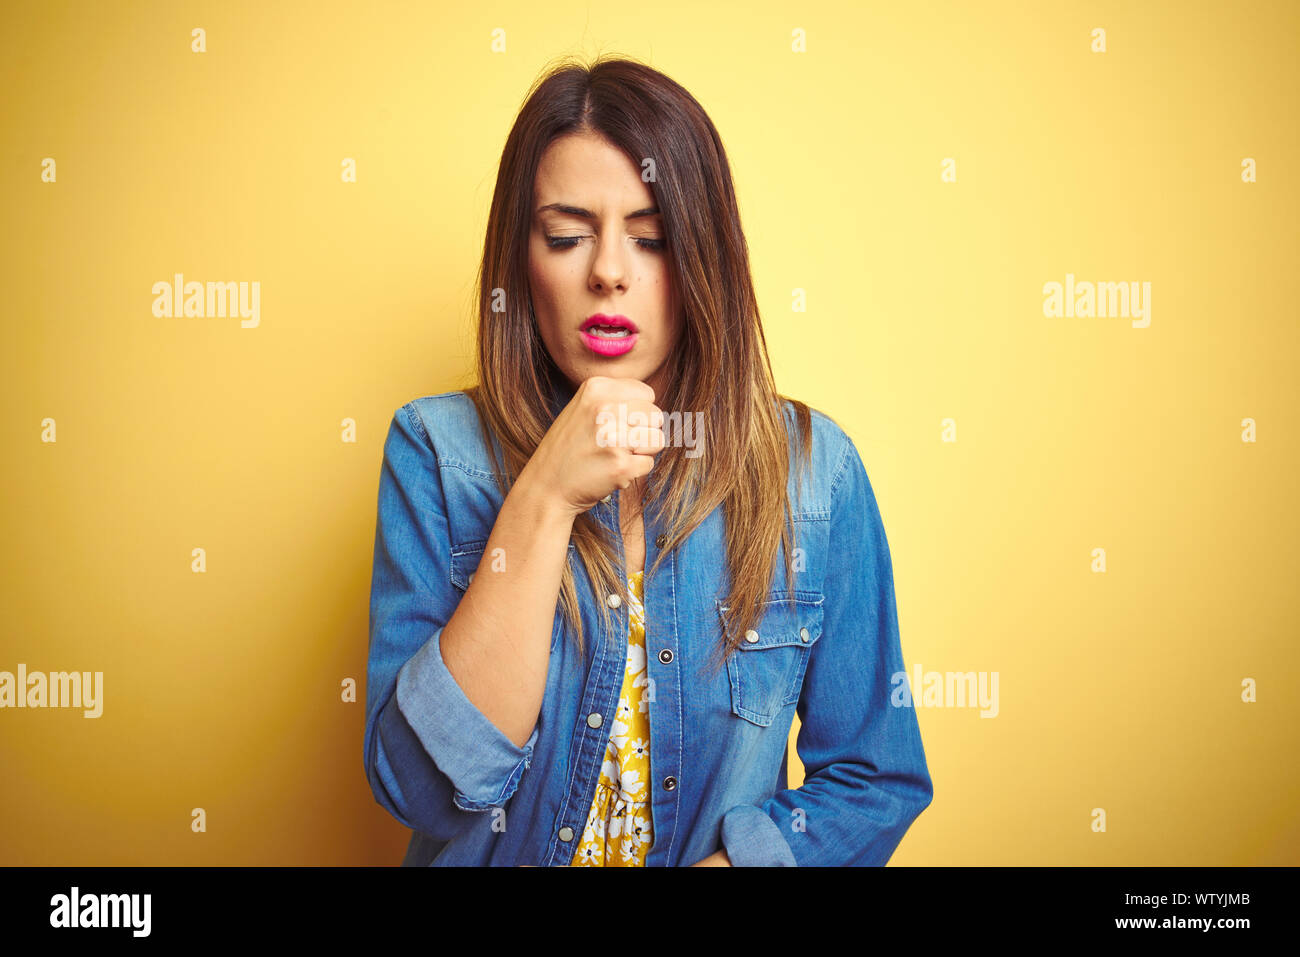 Young beautiful woman standing over yellow isolated background feeling unwell and coughing as symptom for cold or bronchitis. Healthcare concept. Stock Photo